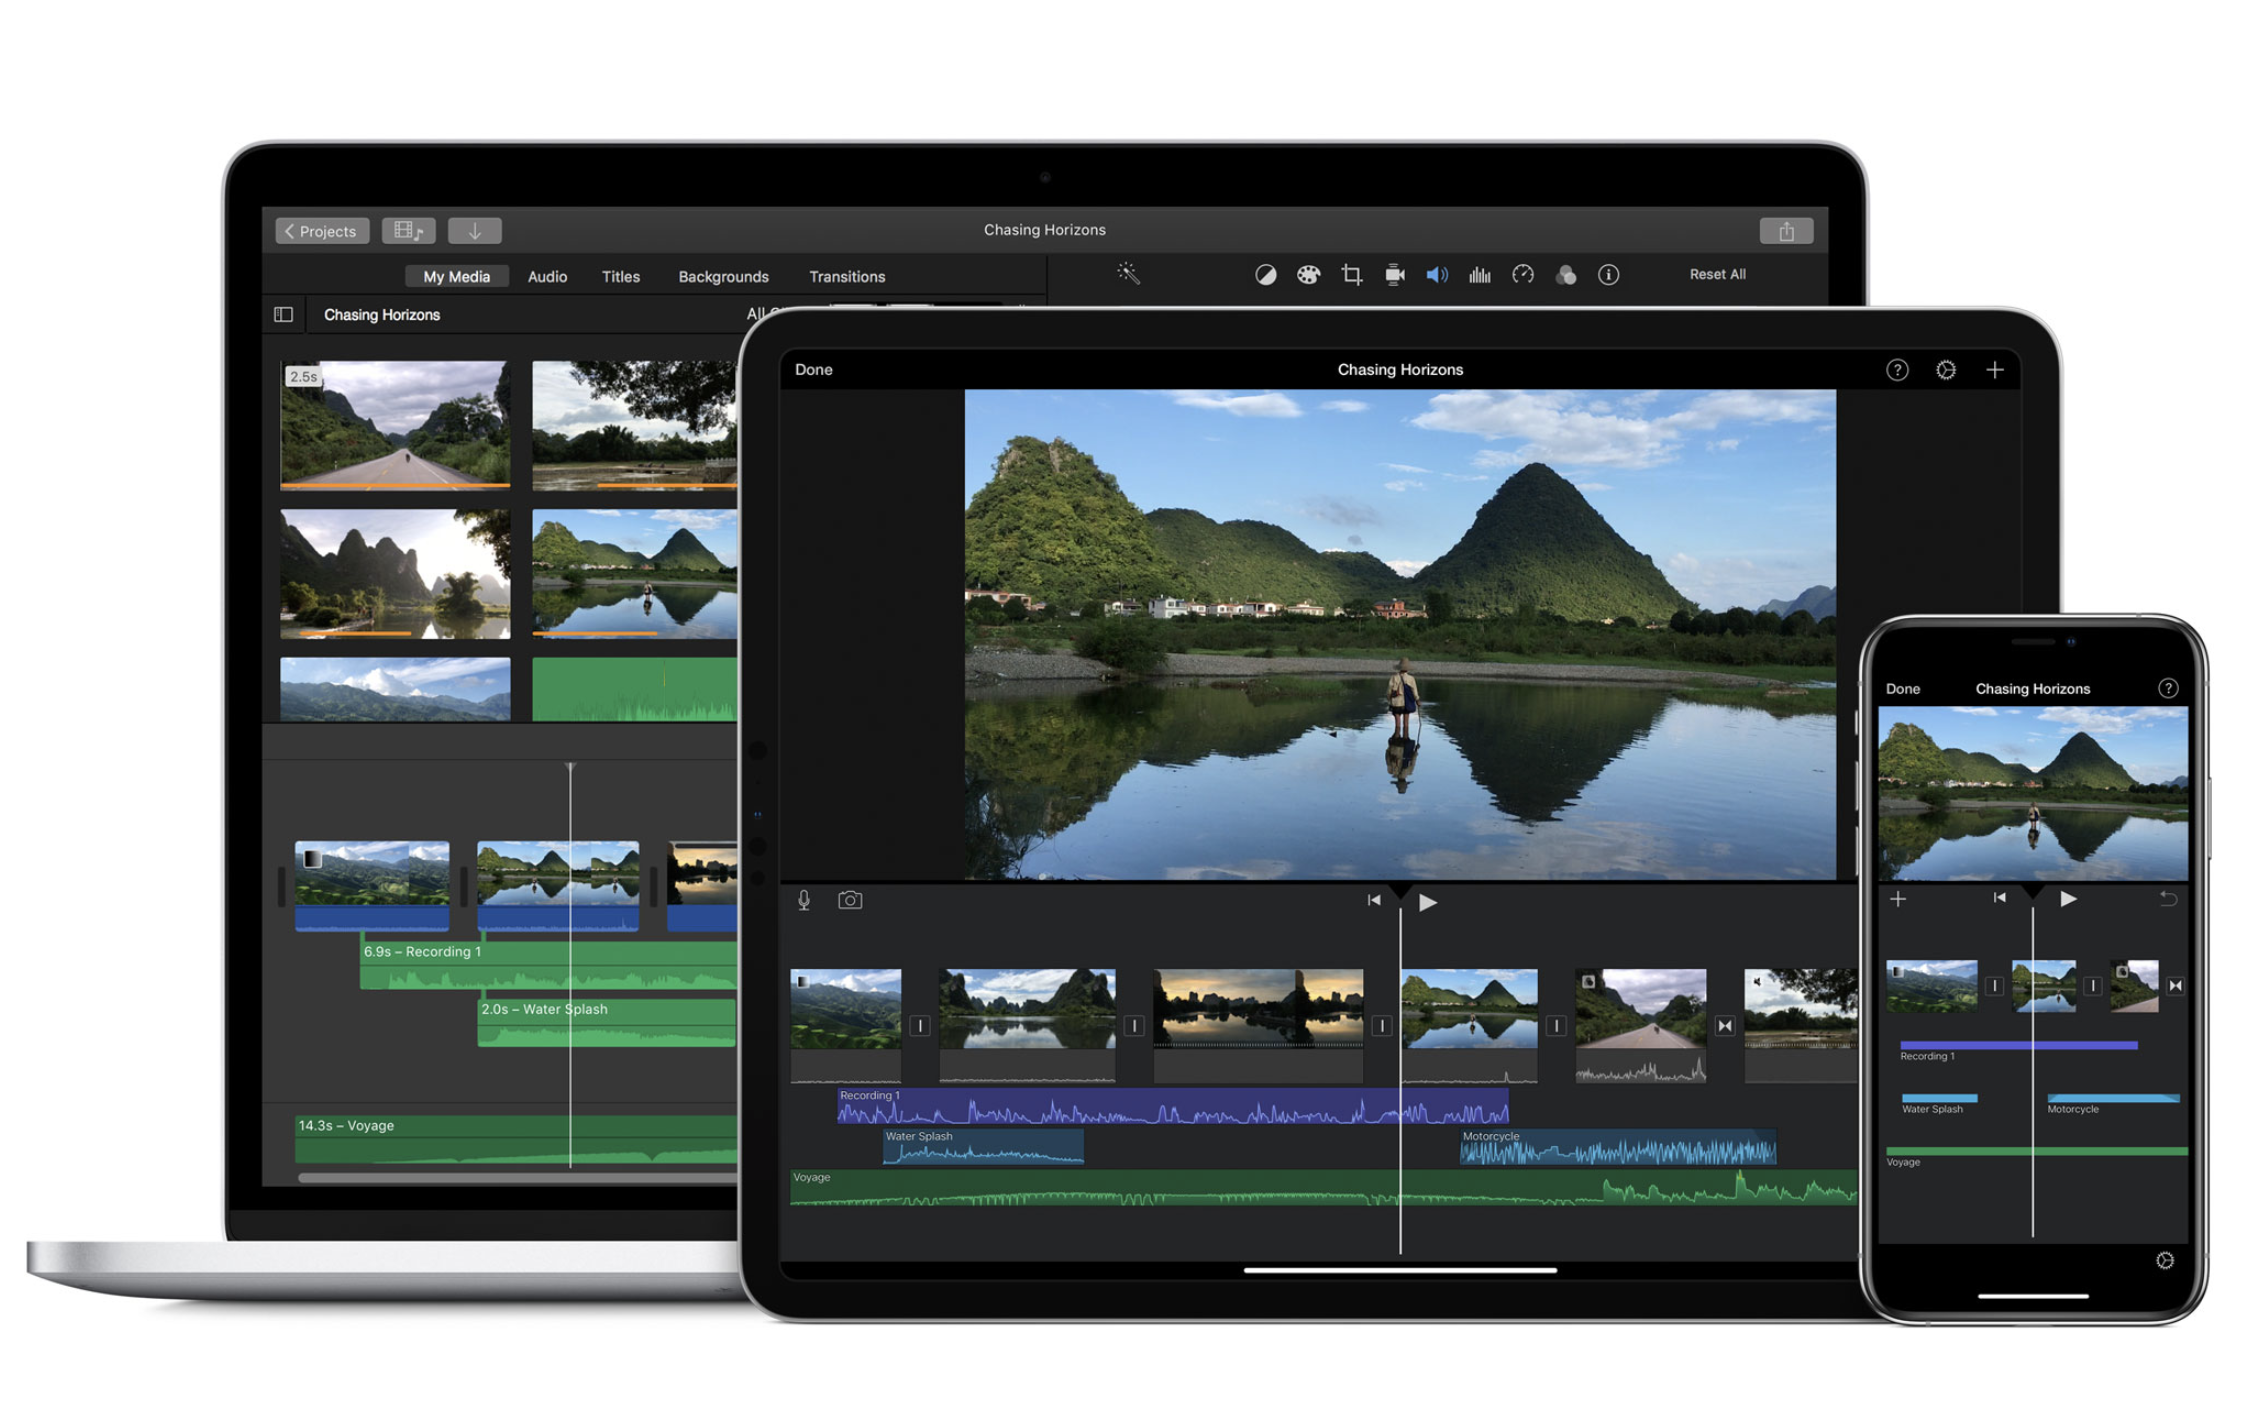 Latest Version Of Imovie For Mac